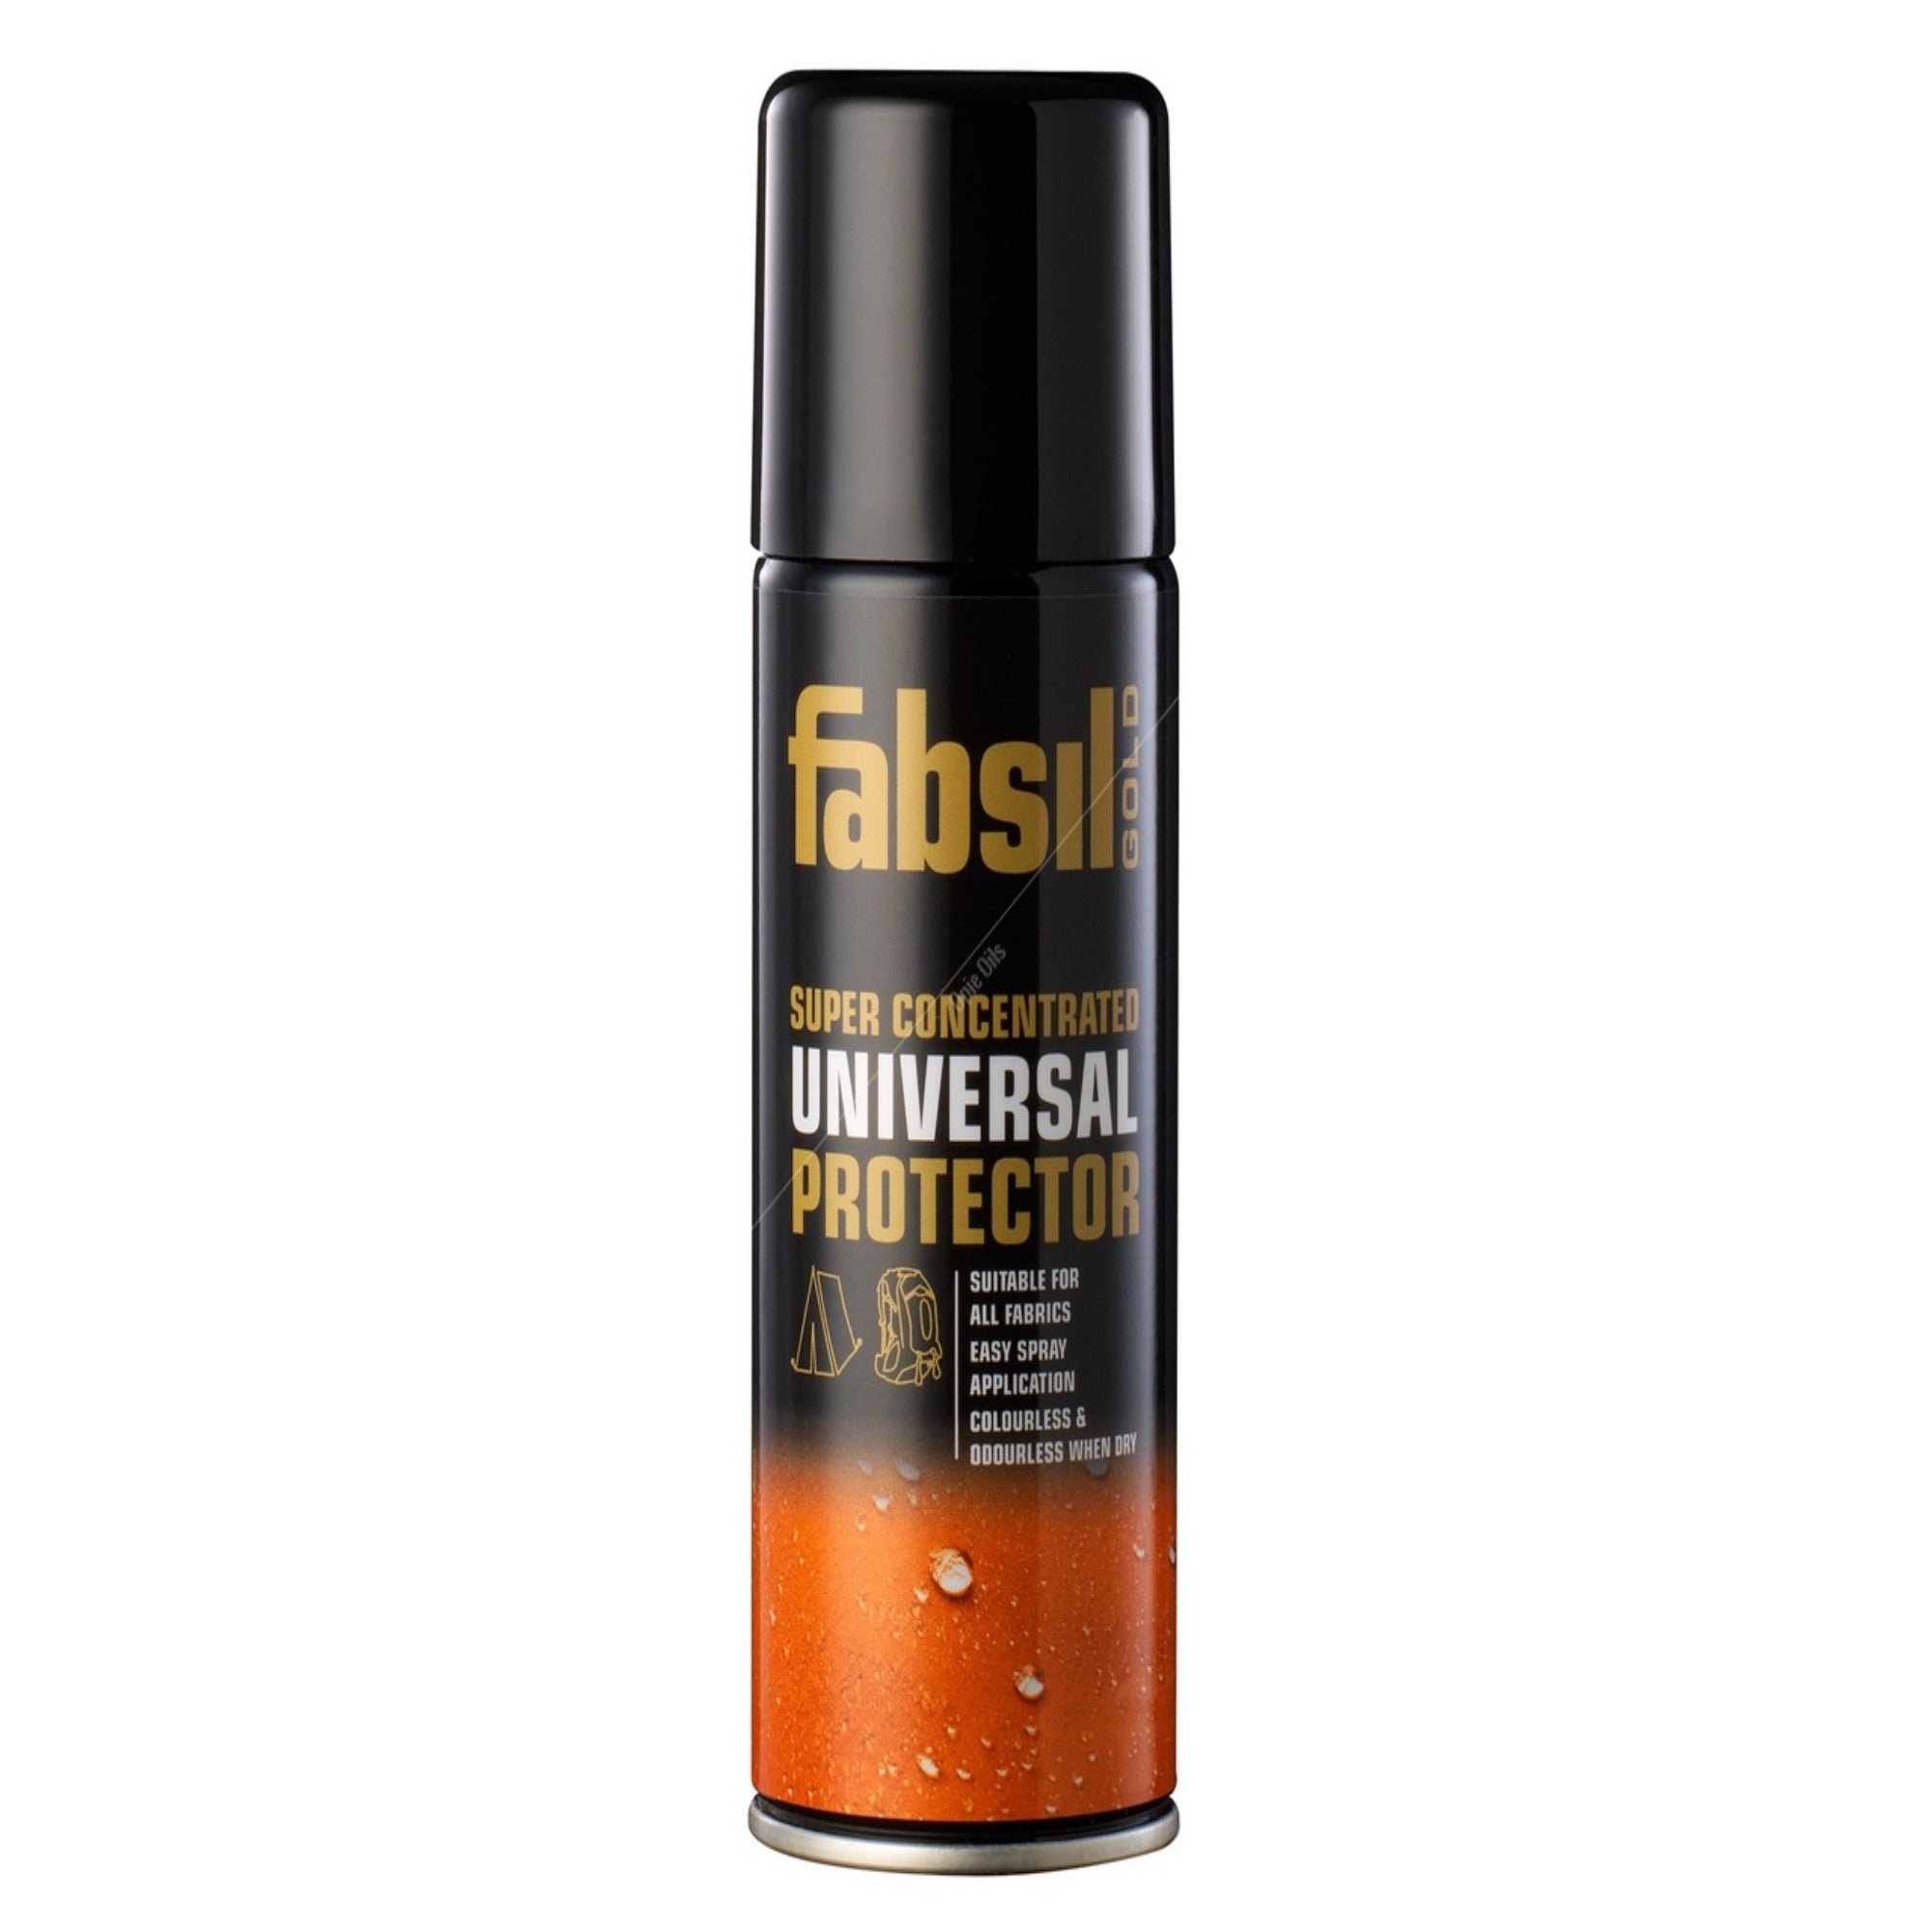 FABSIL Gold Super Concentrated Universal Protector - 200ml